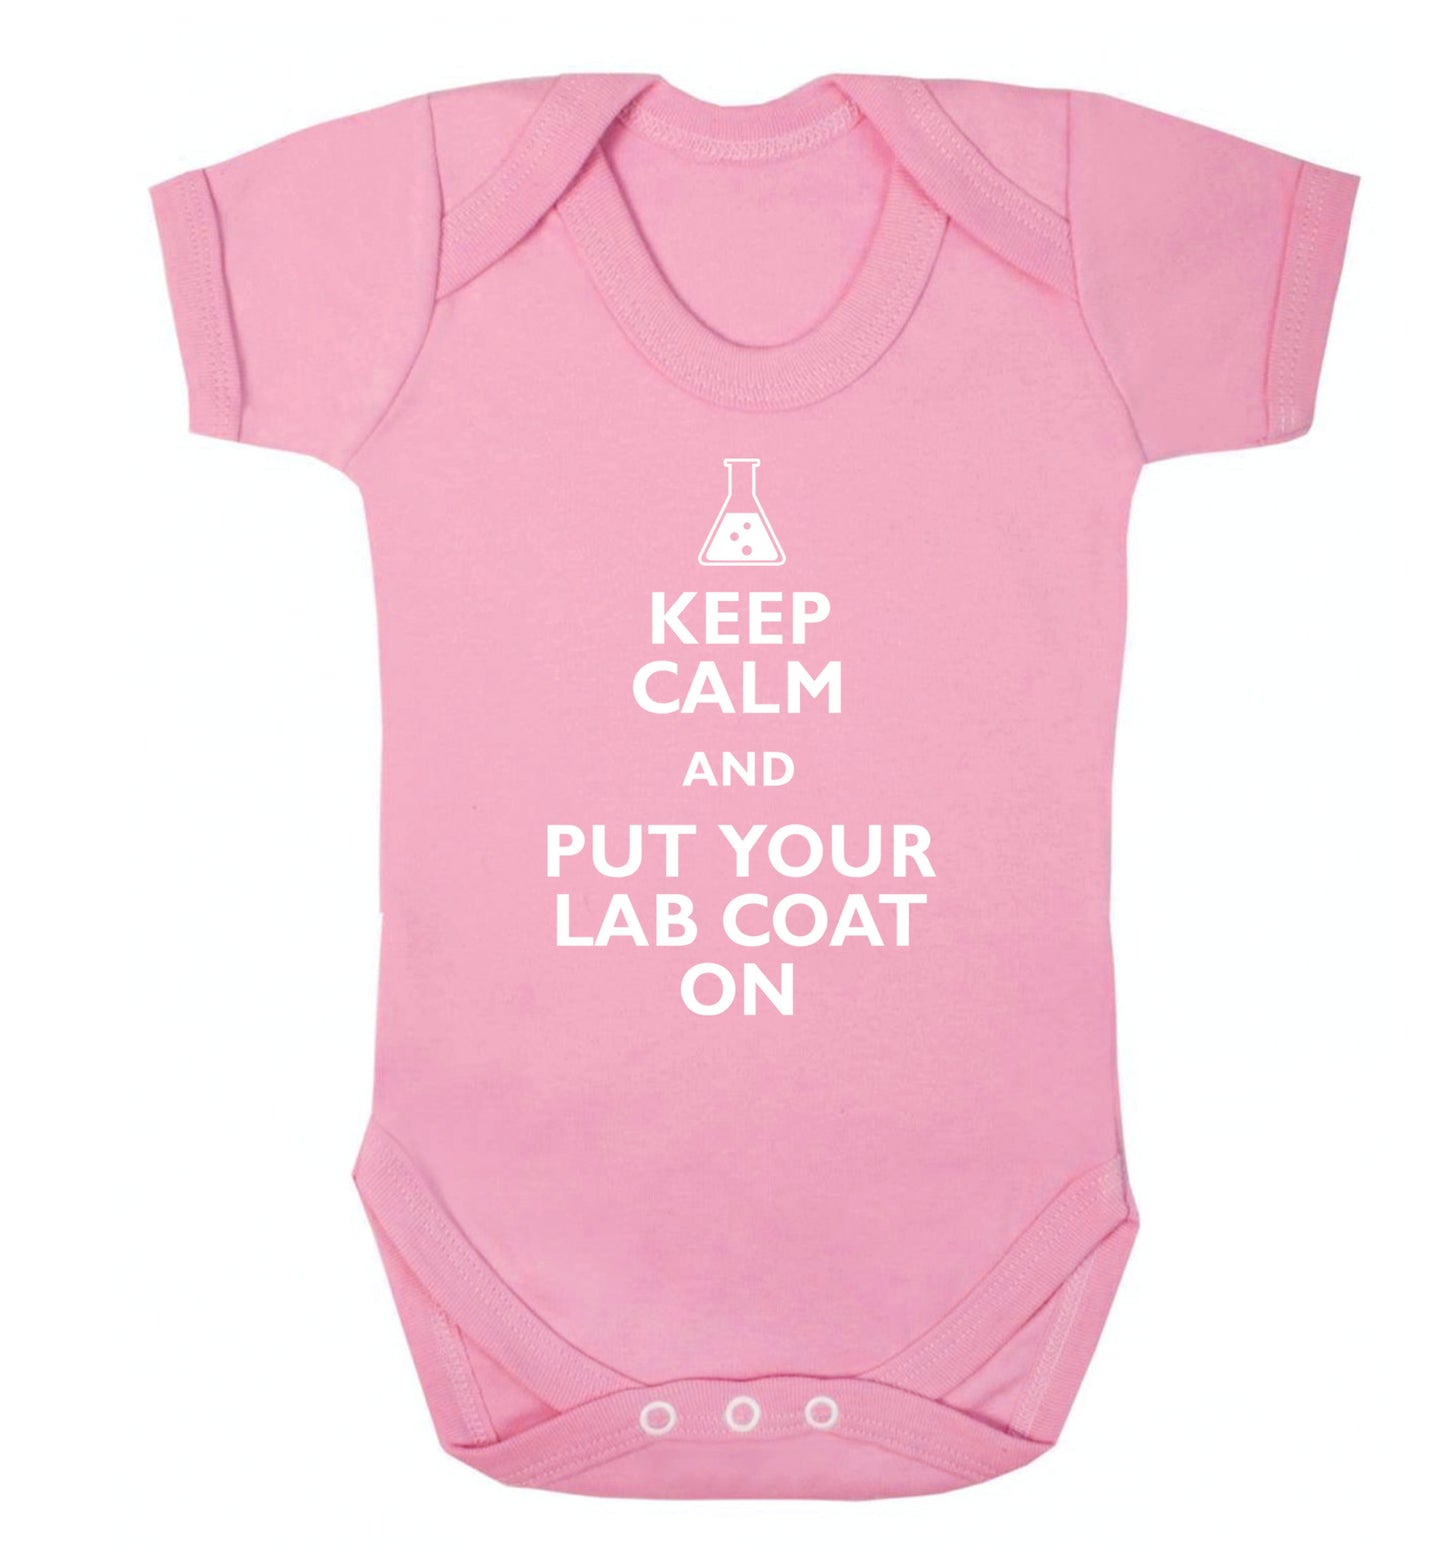 Keep calm and put your lab coat on Baby Vest pale pink 18-24 months